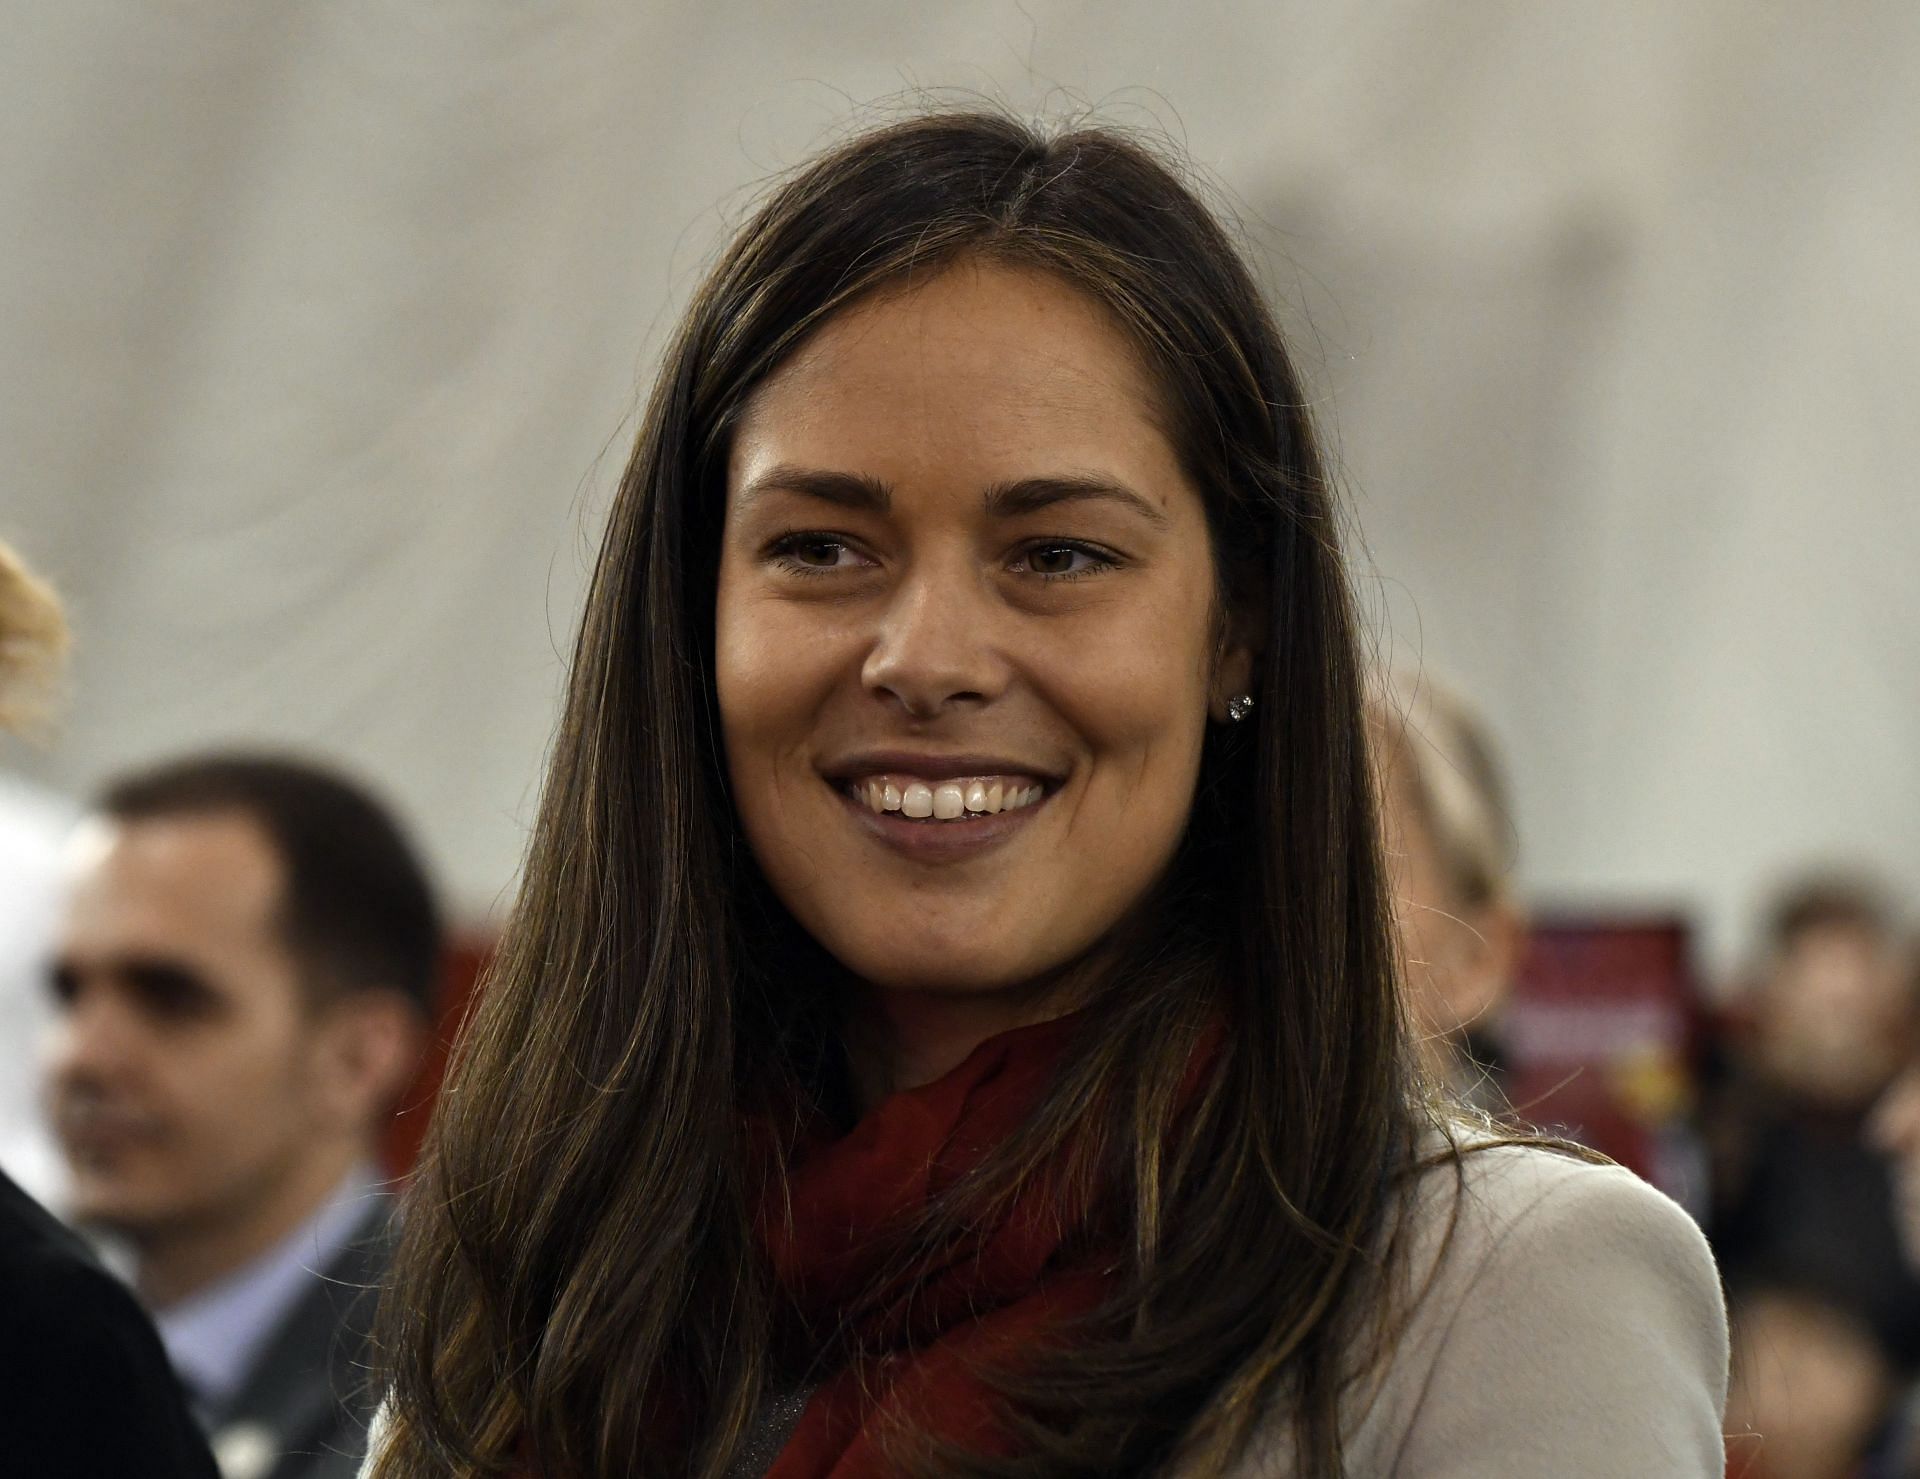 Ana Ivanovic at The Fire Pitch in Chicago